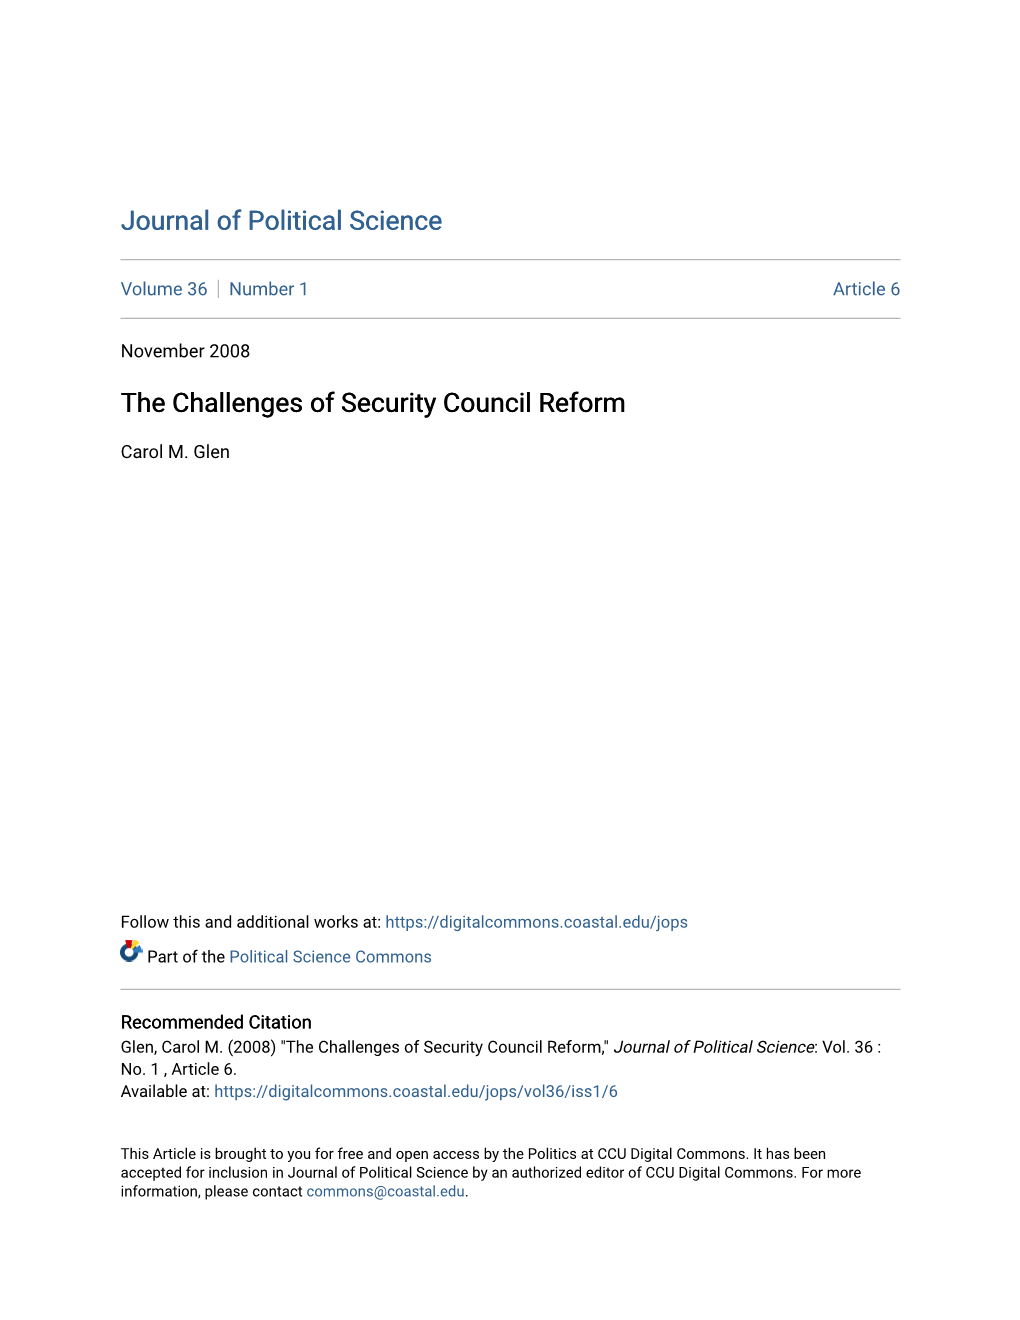 The Challenges of Security Council Reform